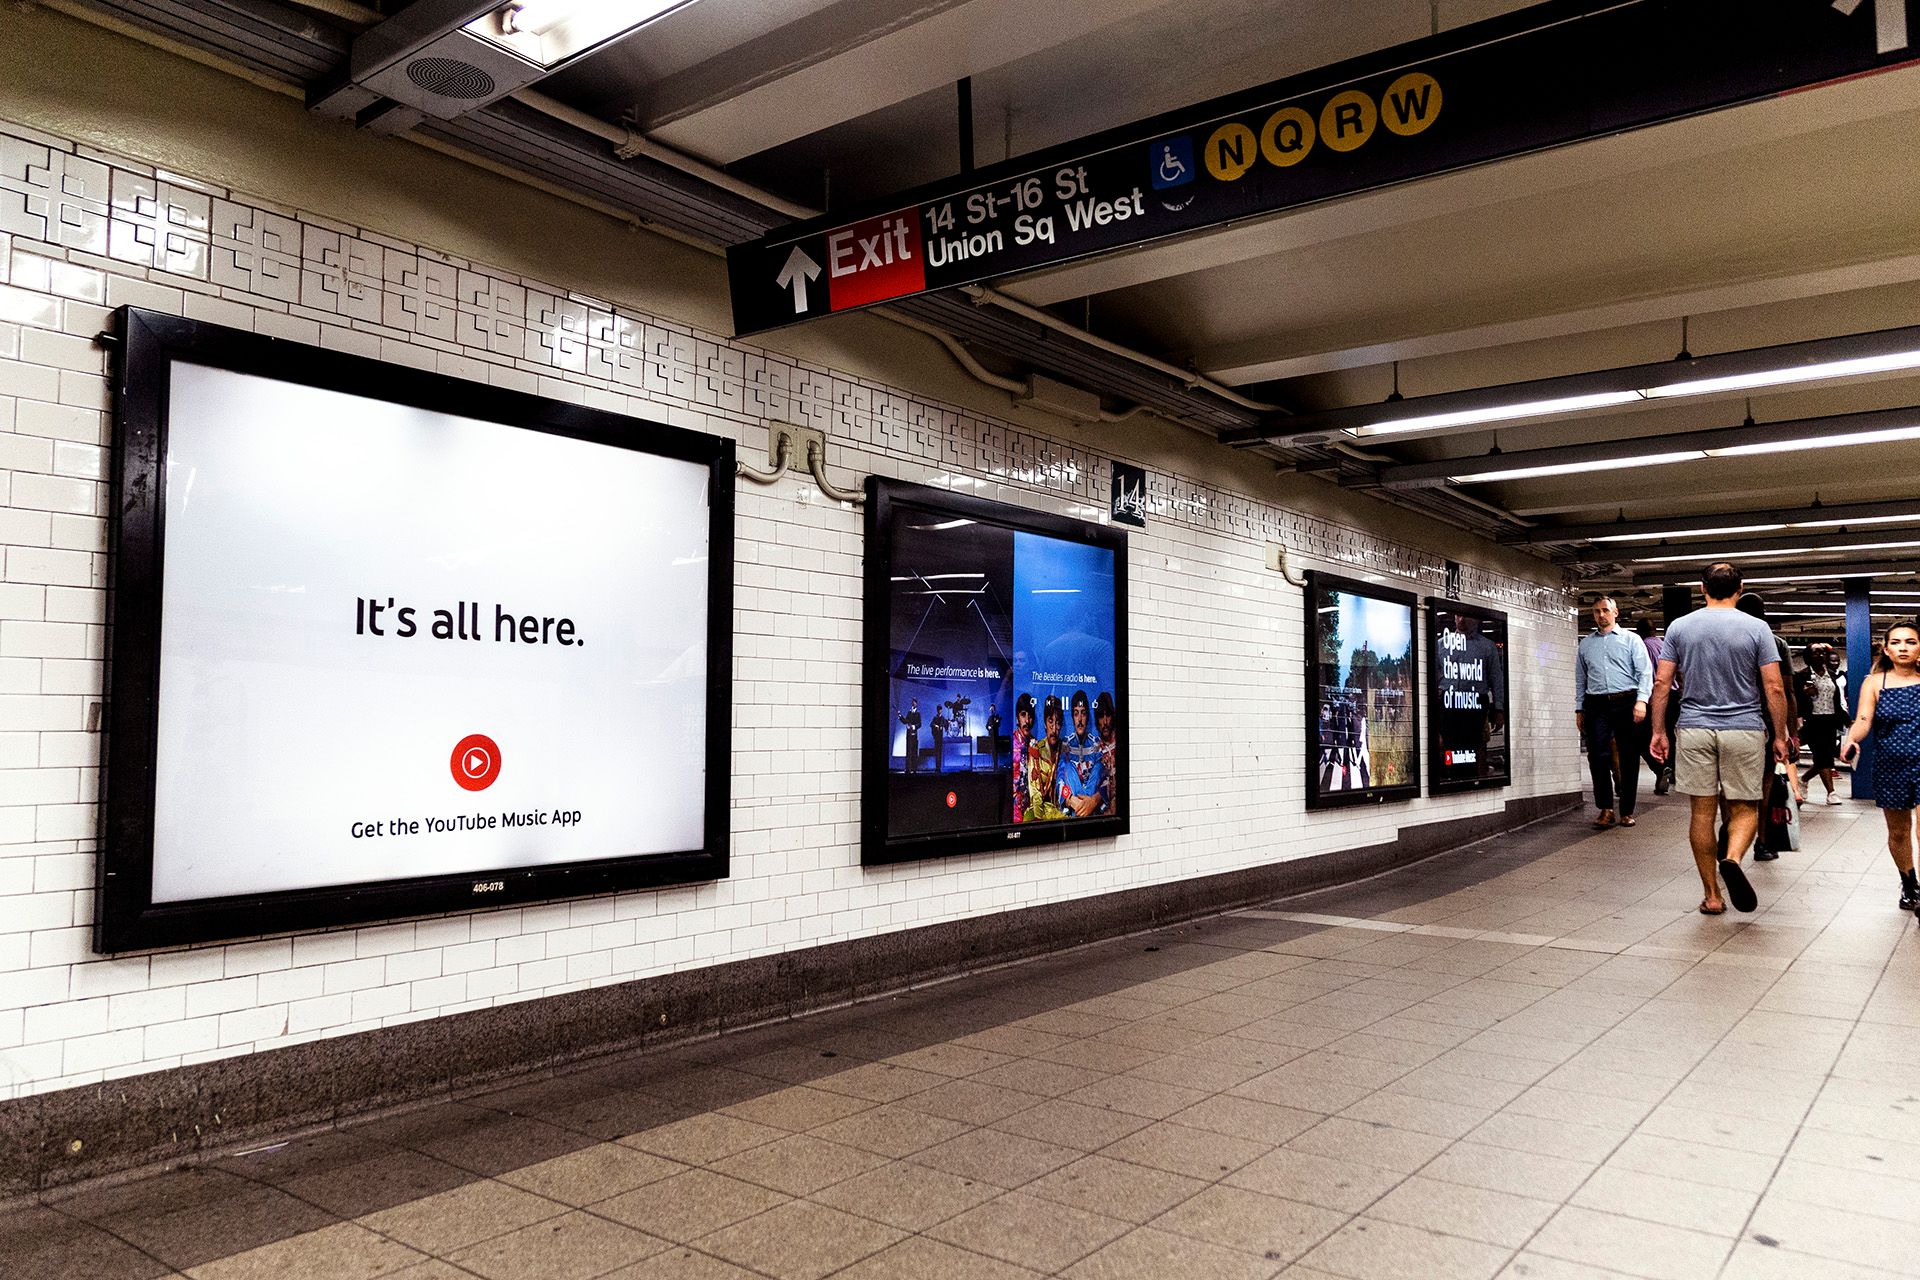 YouTube Music ads on tiled wall in Union Square train station. It's all here. Get the YouTube Music App